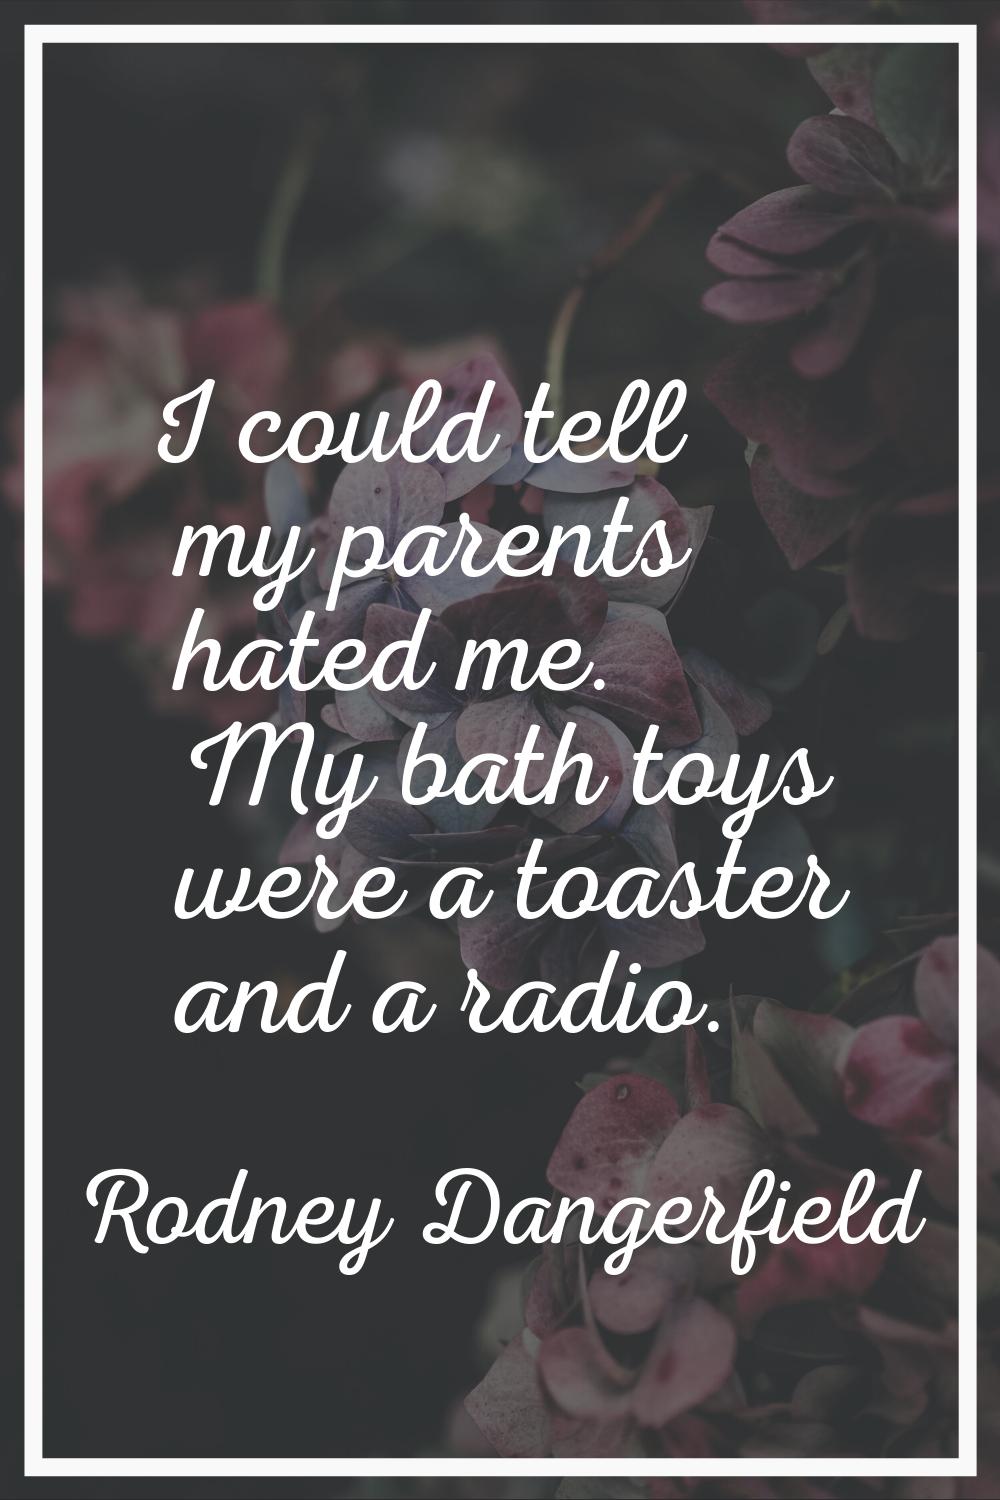 I could tell my parents hated me. My bath toys were a toaster and a radio.